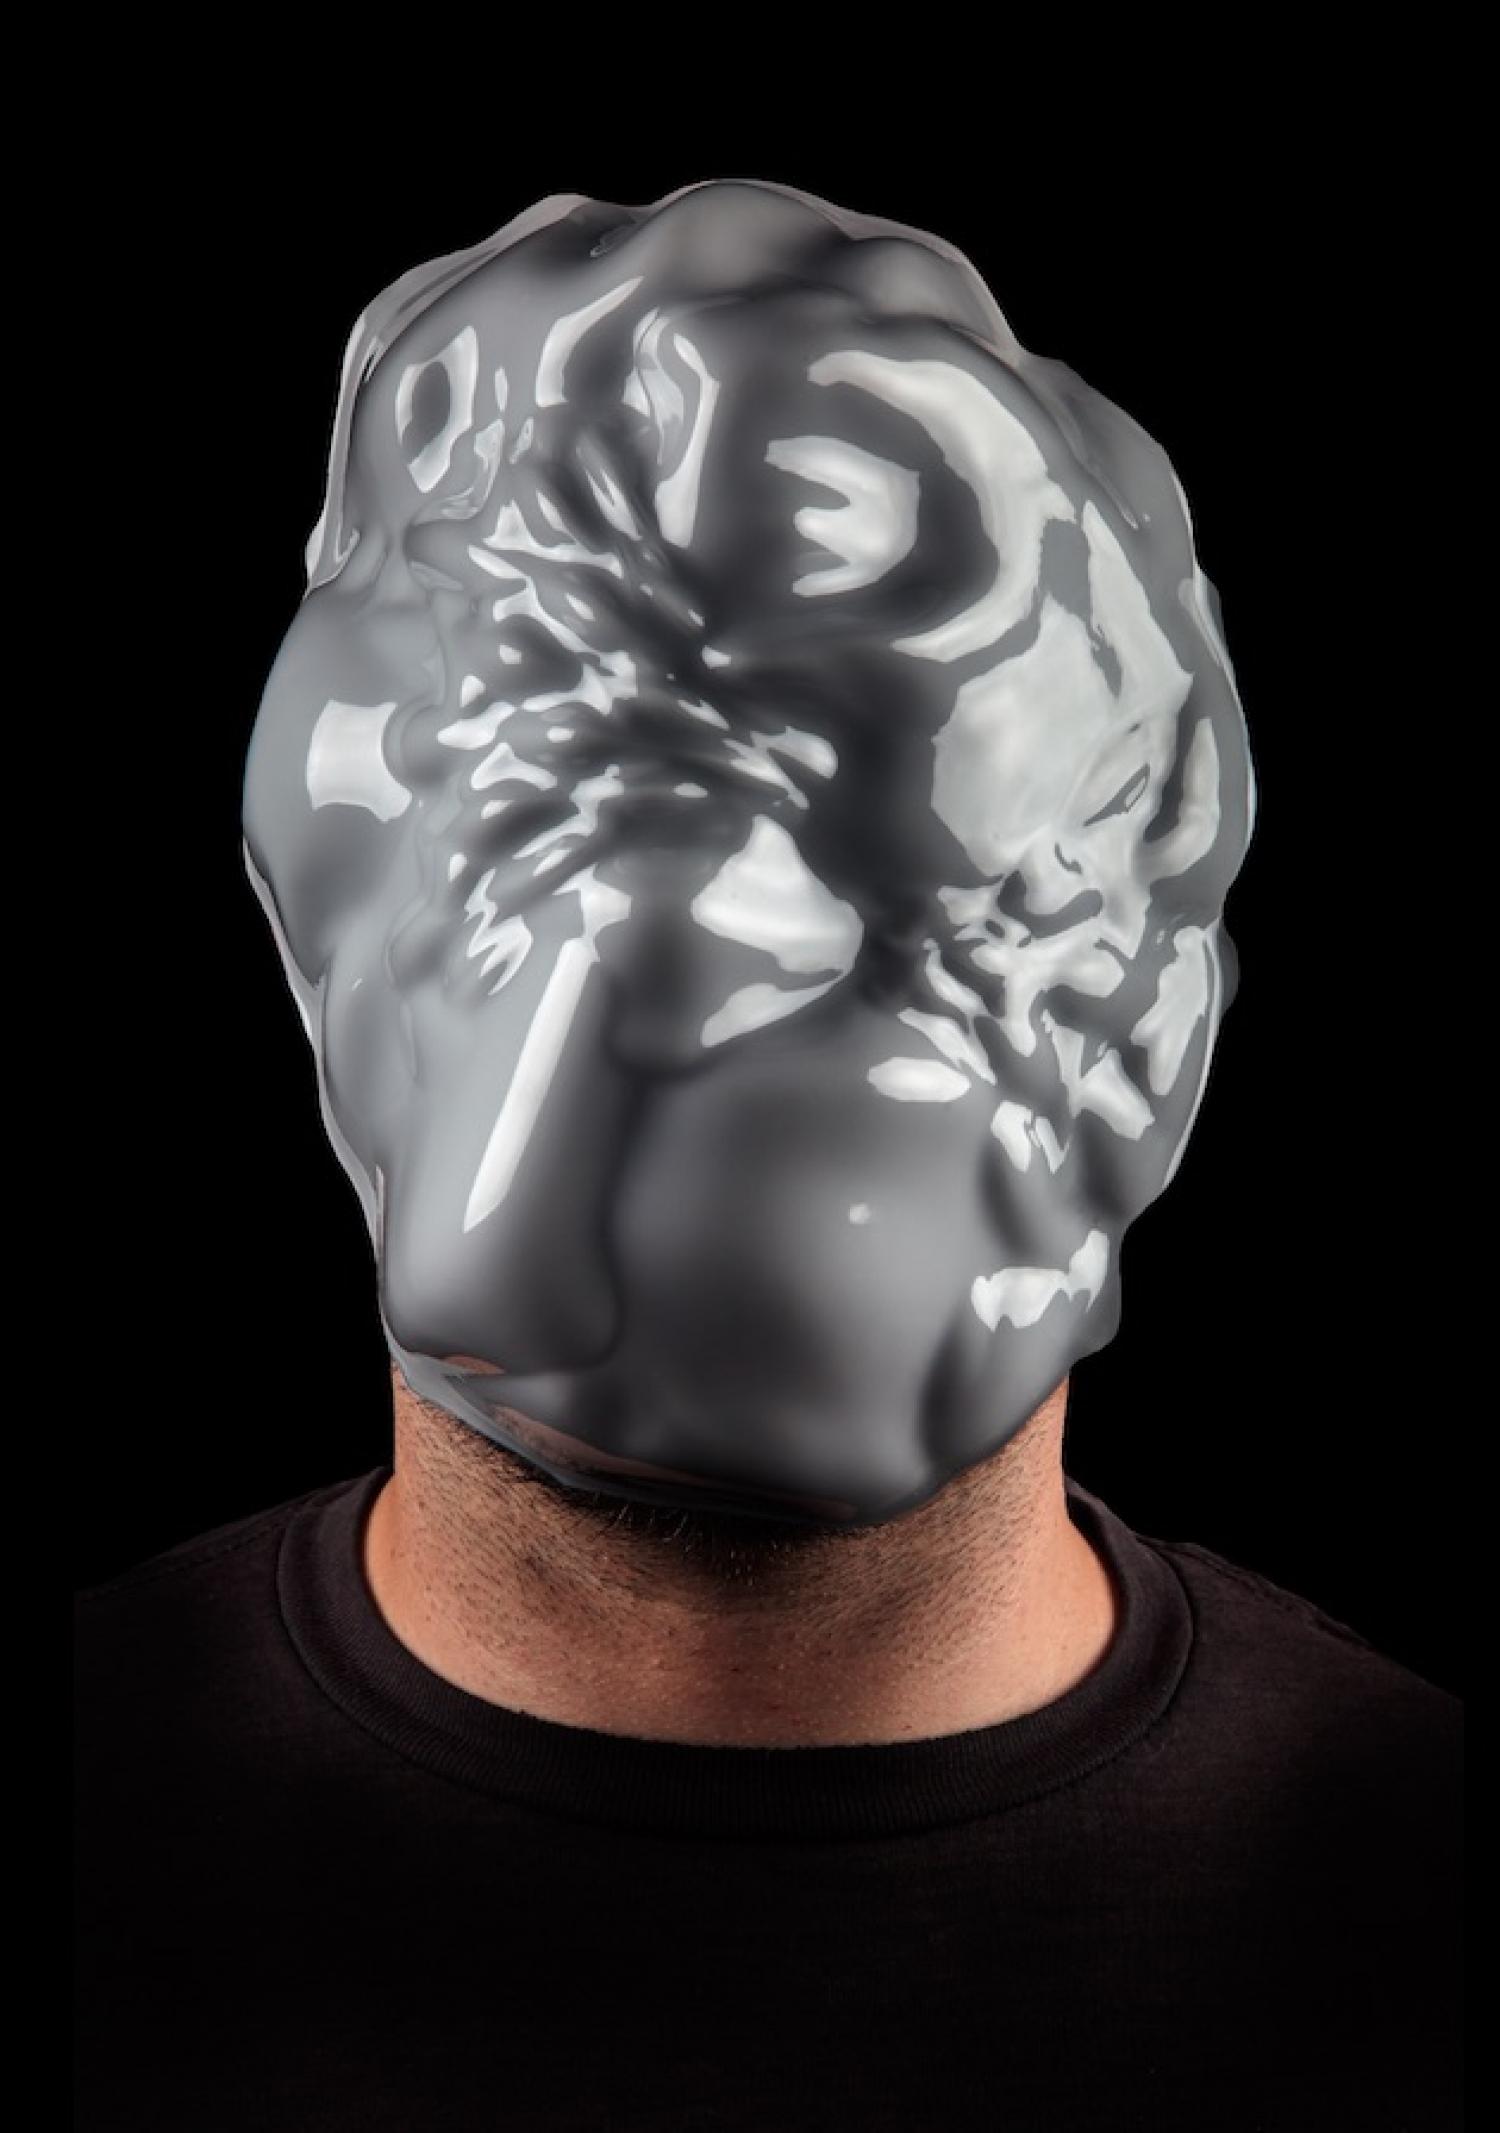 Zach Blas, <i>Facial Weaponization Suite: Mask - May 19, 2014, Mexico City, Mexico</i> (2014). Courtesy of the artist, photo by Christopher O’Leary.